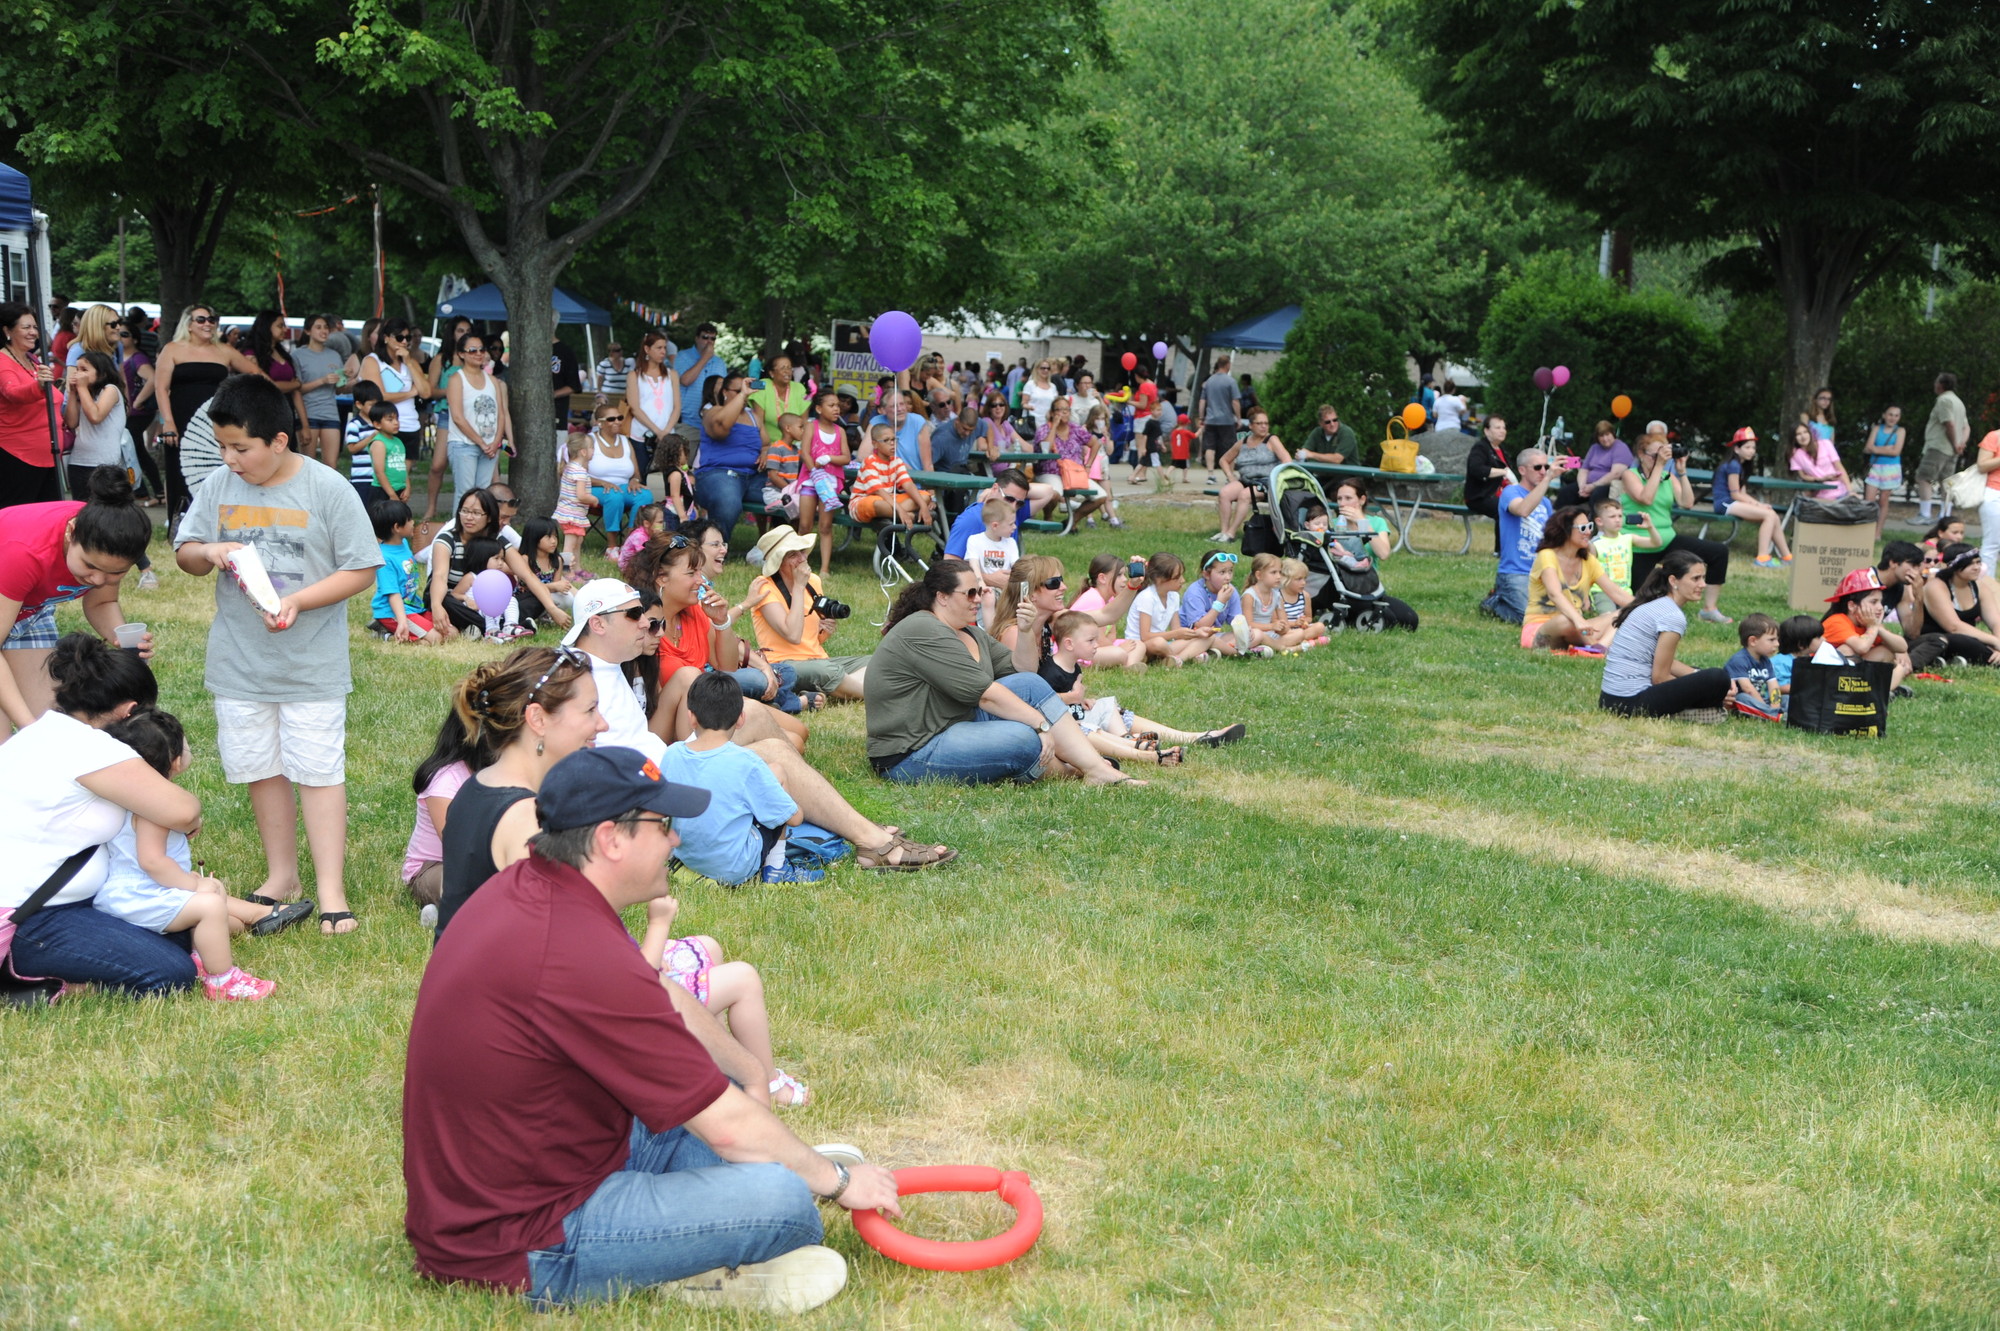 Thousands flocked Speno Park on East Meadow Avenue to take part in Pride Day.